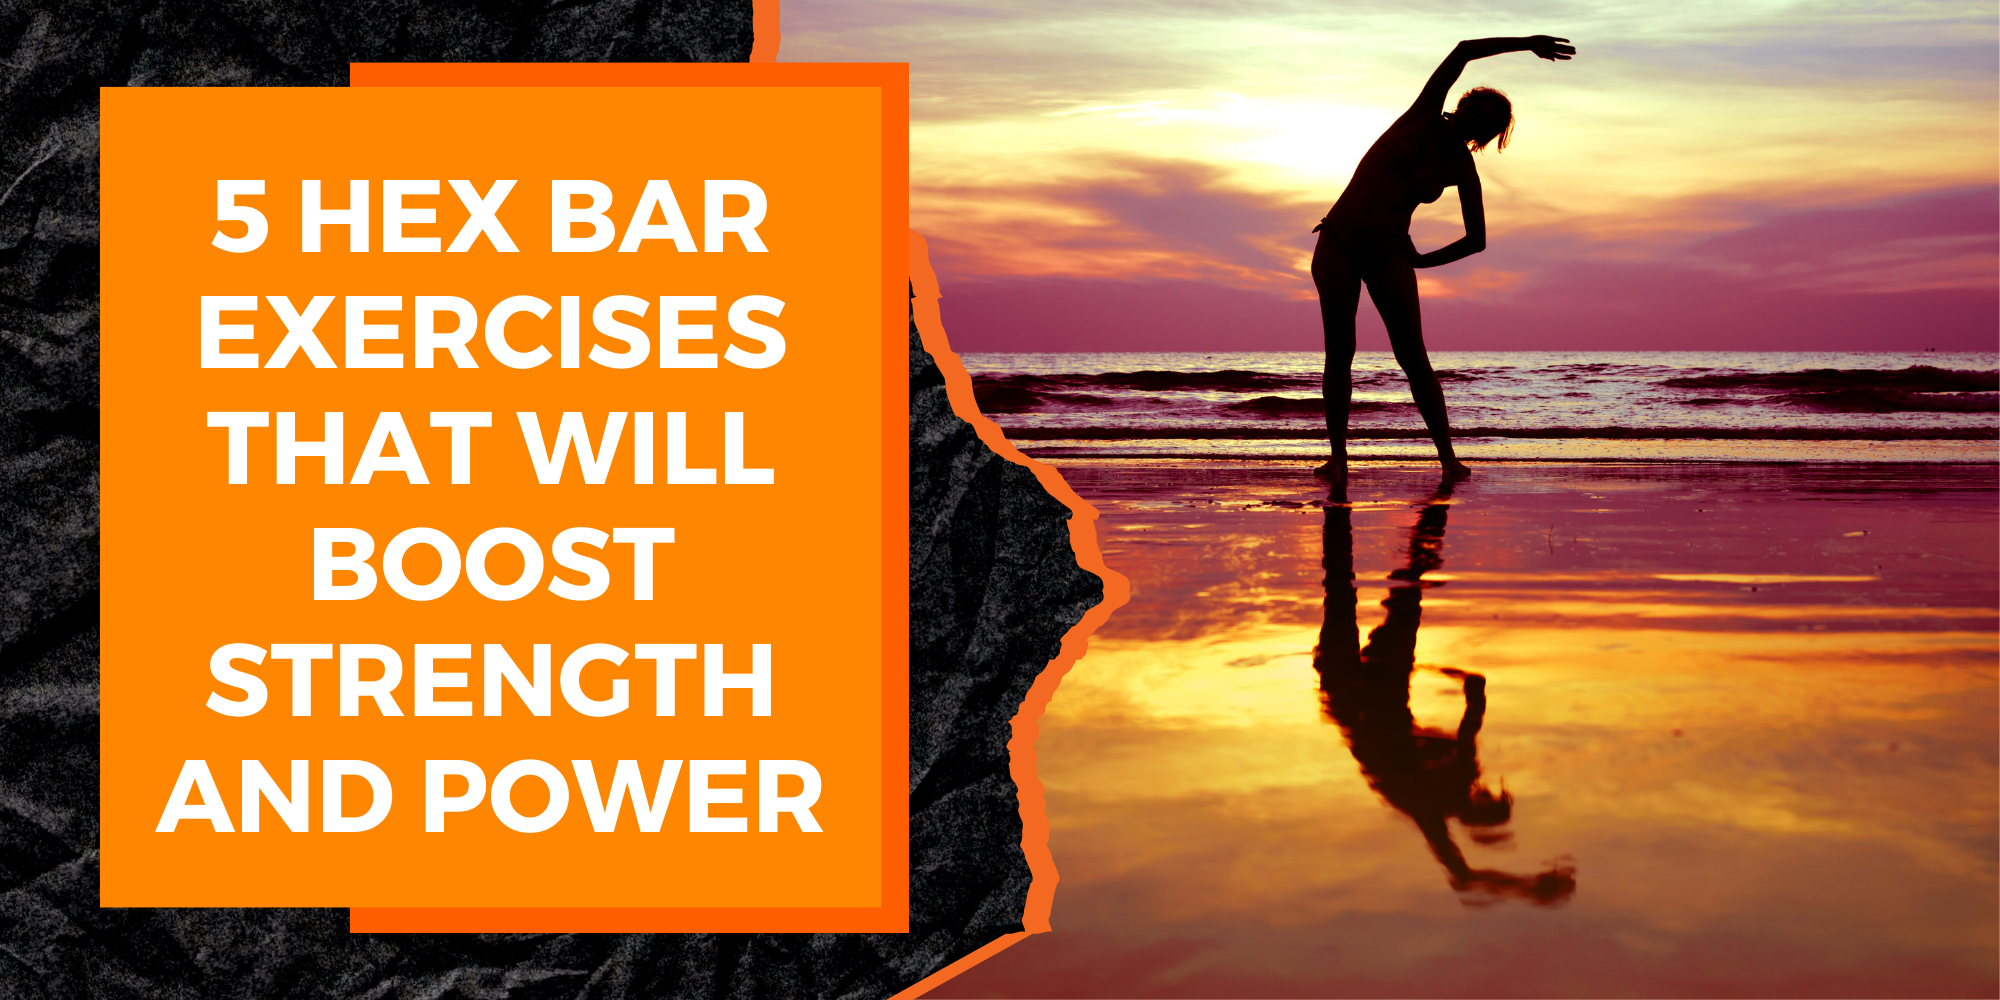 5 Hex Bar Exercises That Will Boost Strength and Power